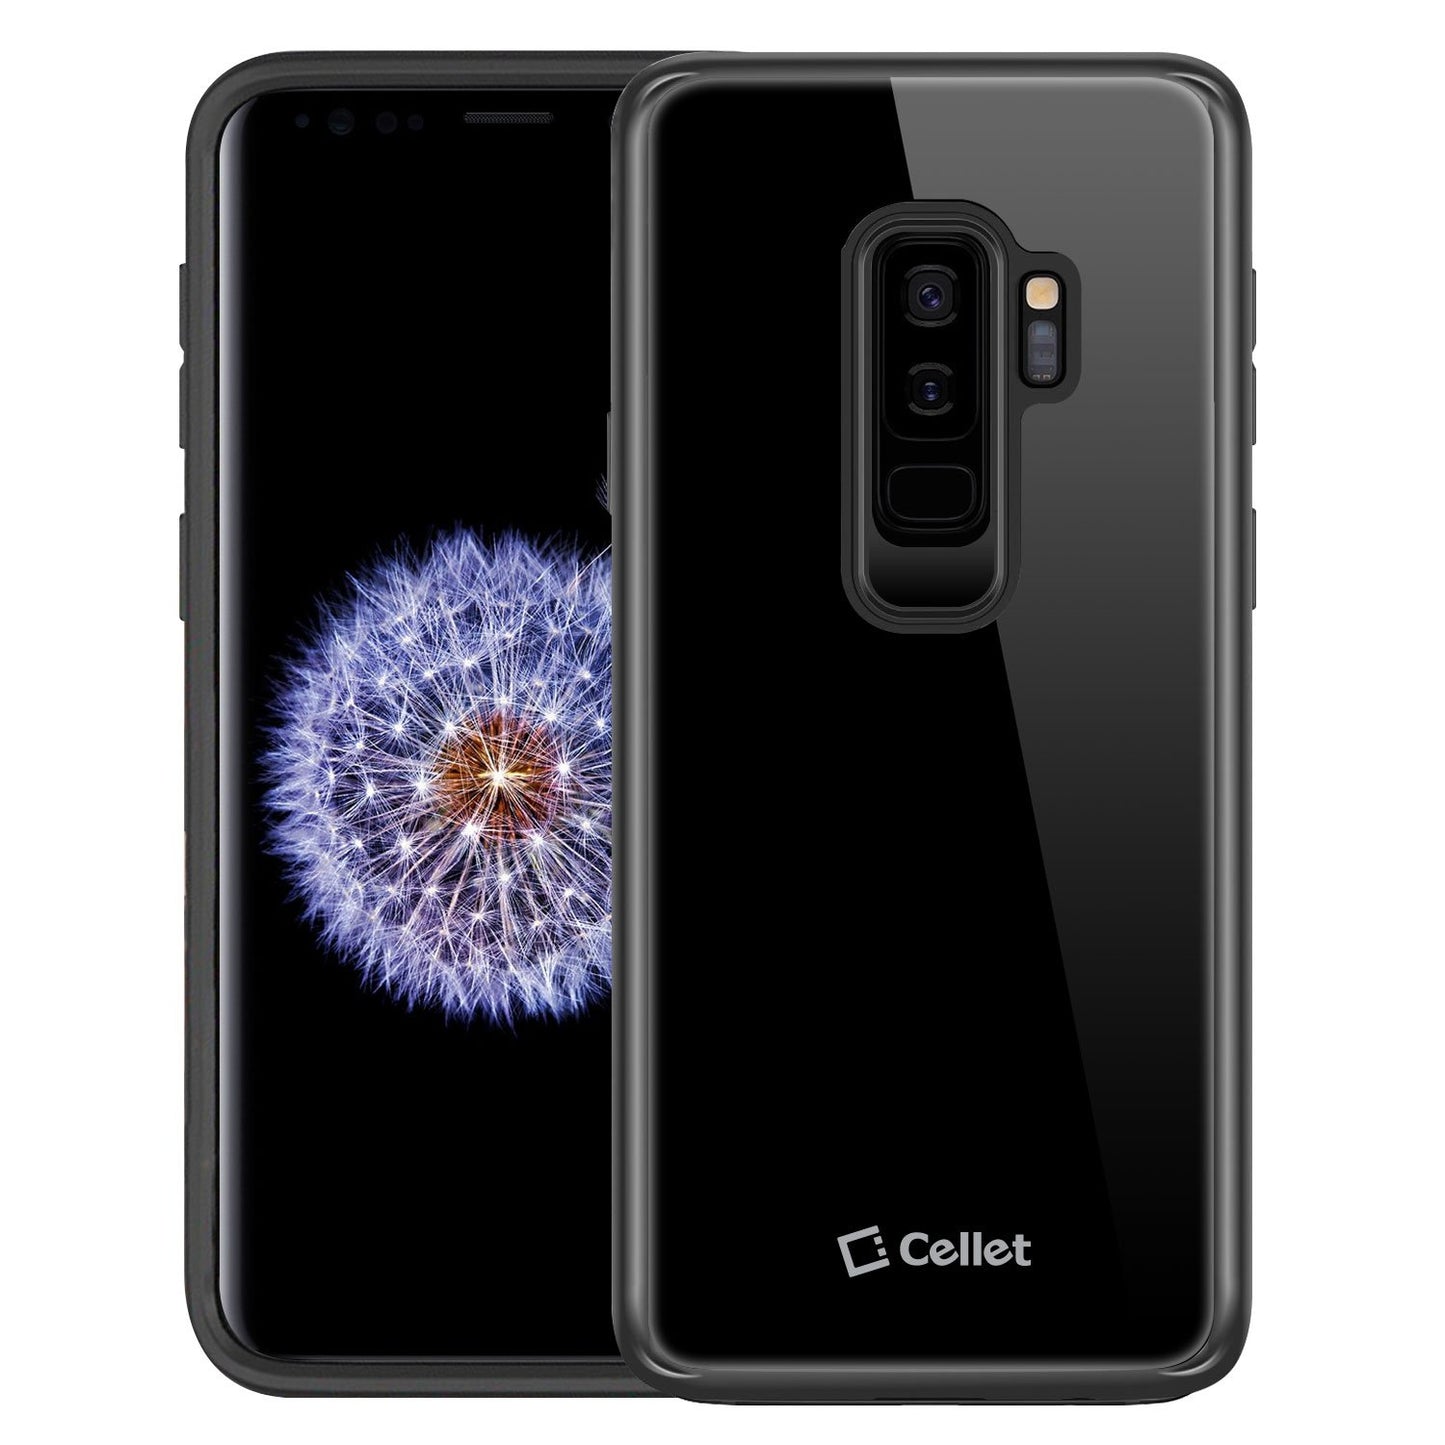 CCSAMS9P81BK - Heavy Duty Protection Slim Hard Case Cover - Clear- Galaxy S9 Plus